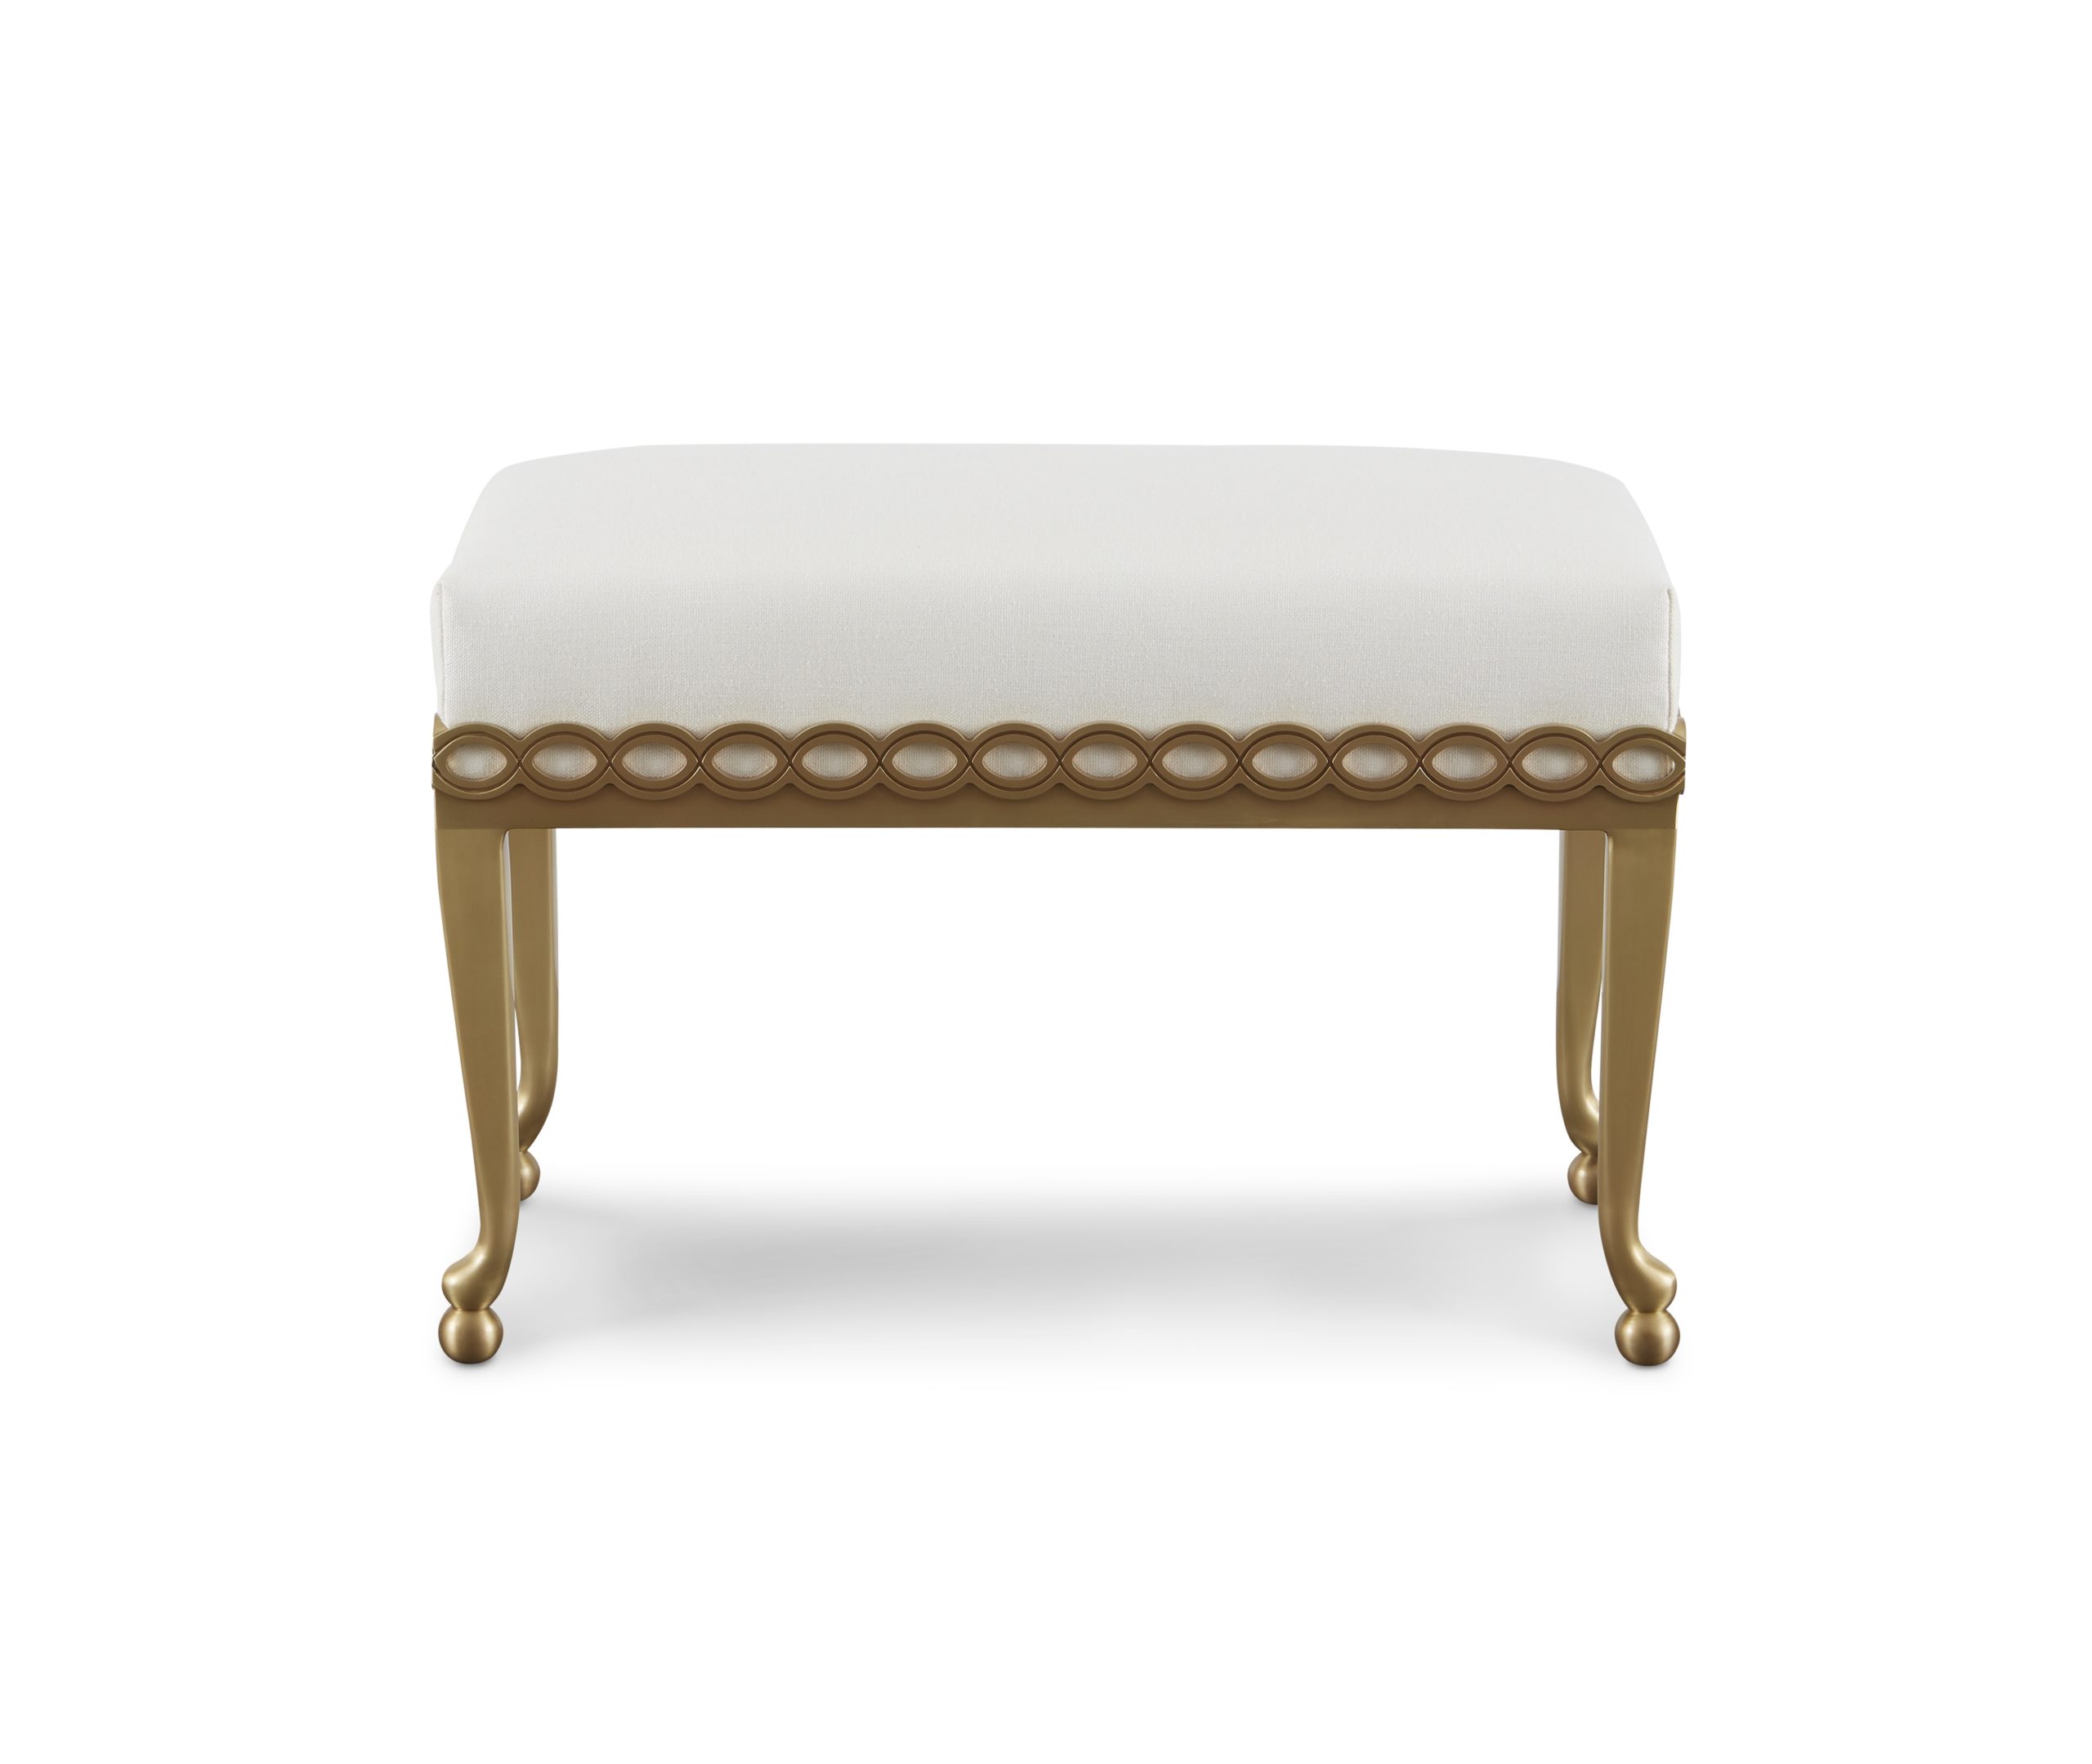 Baker_products_WNWN_infinity_petite_bench_BAA3218_FRONT-scaled-6